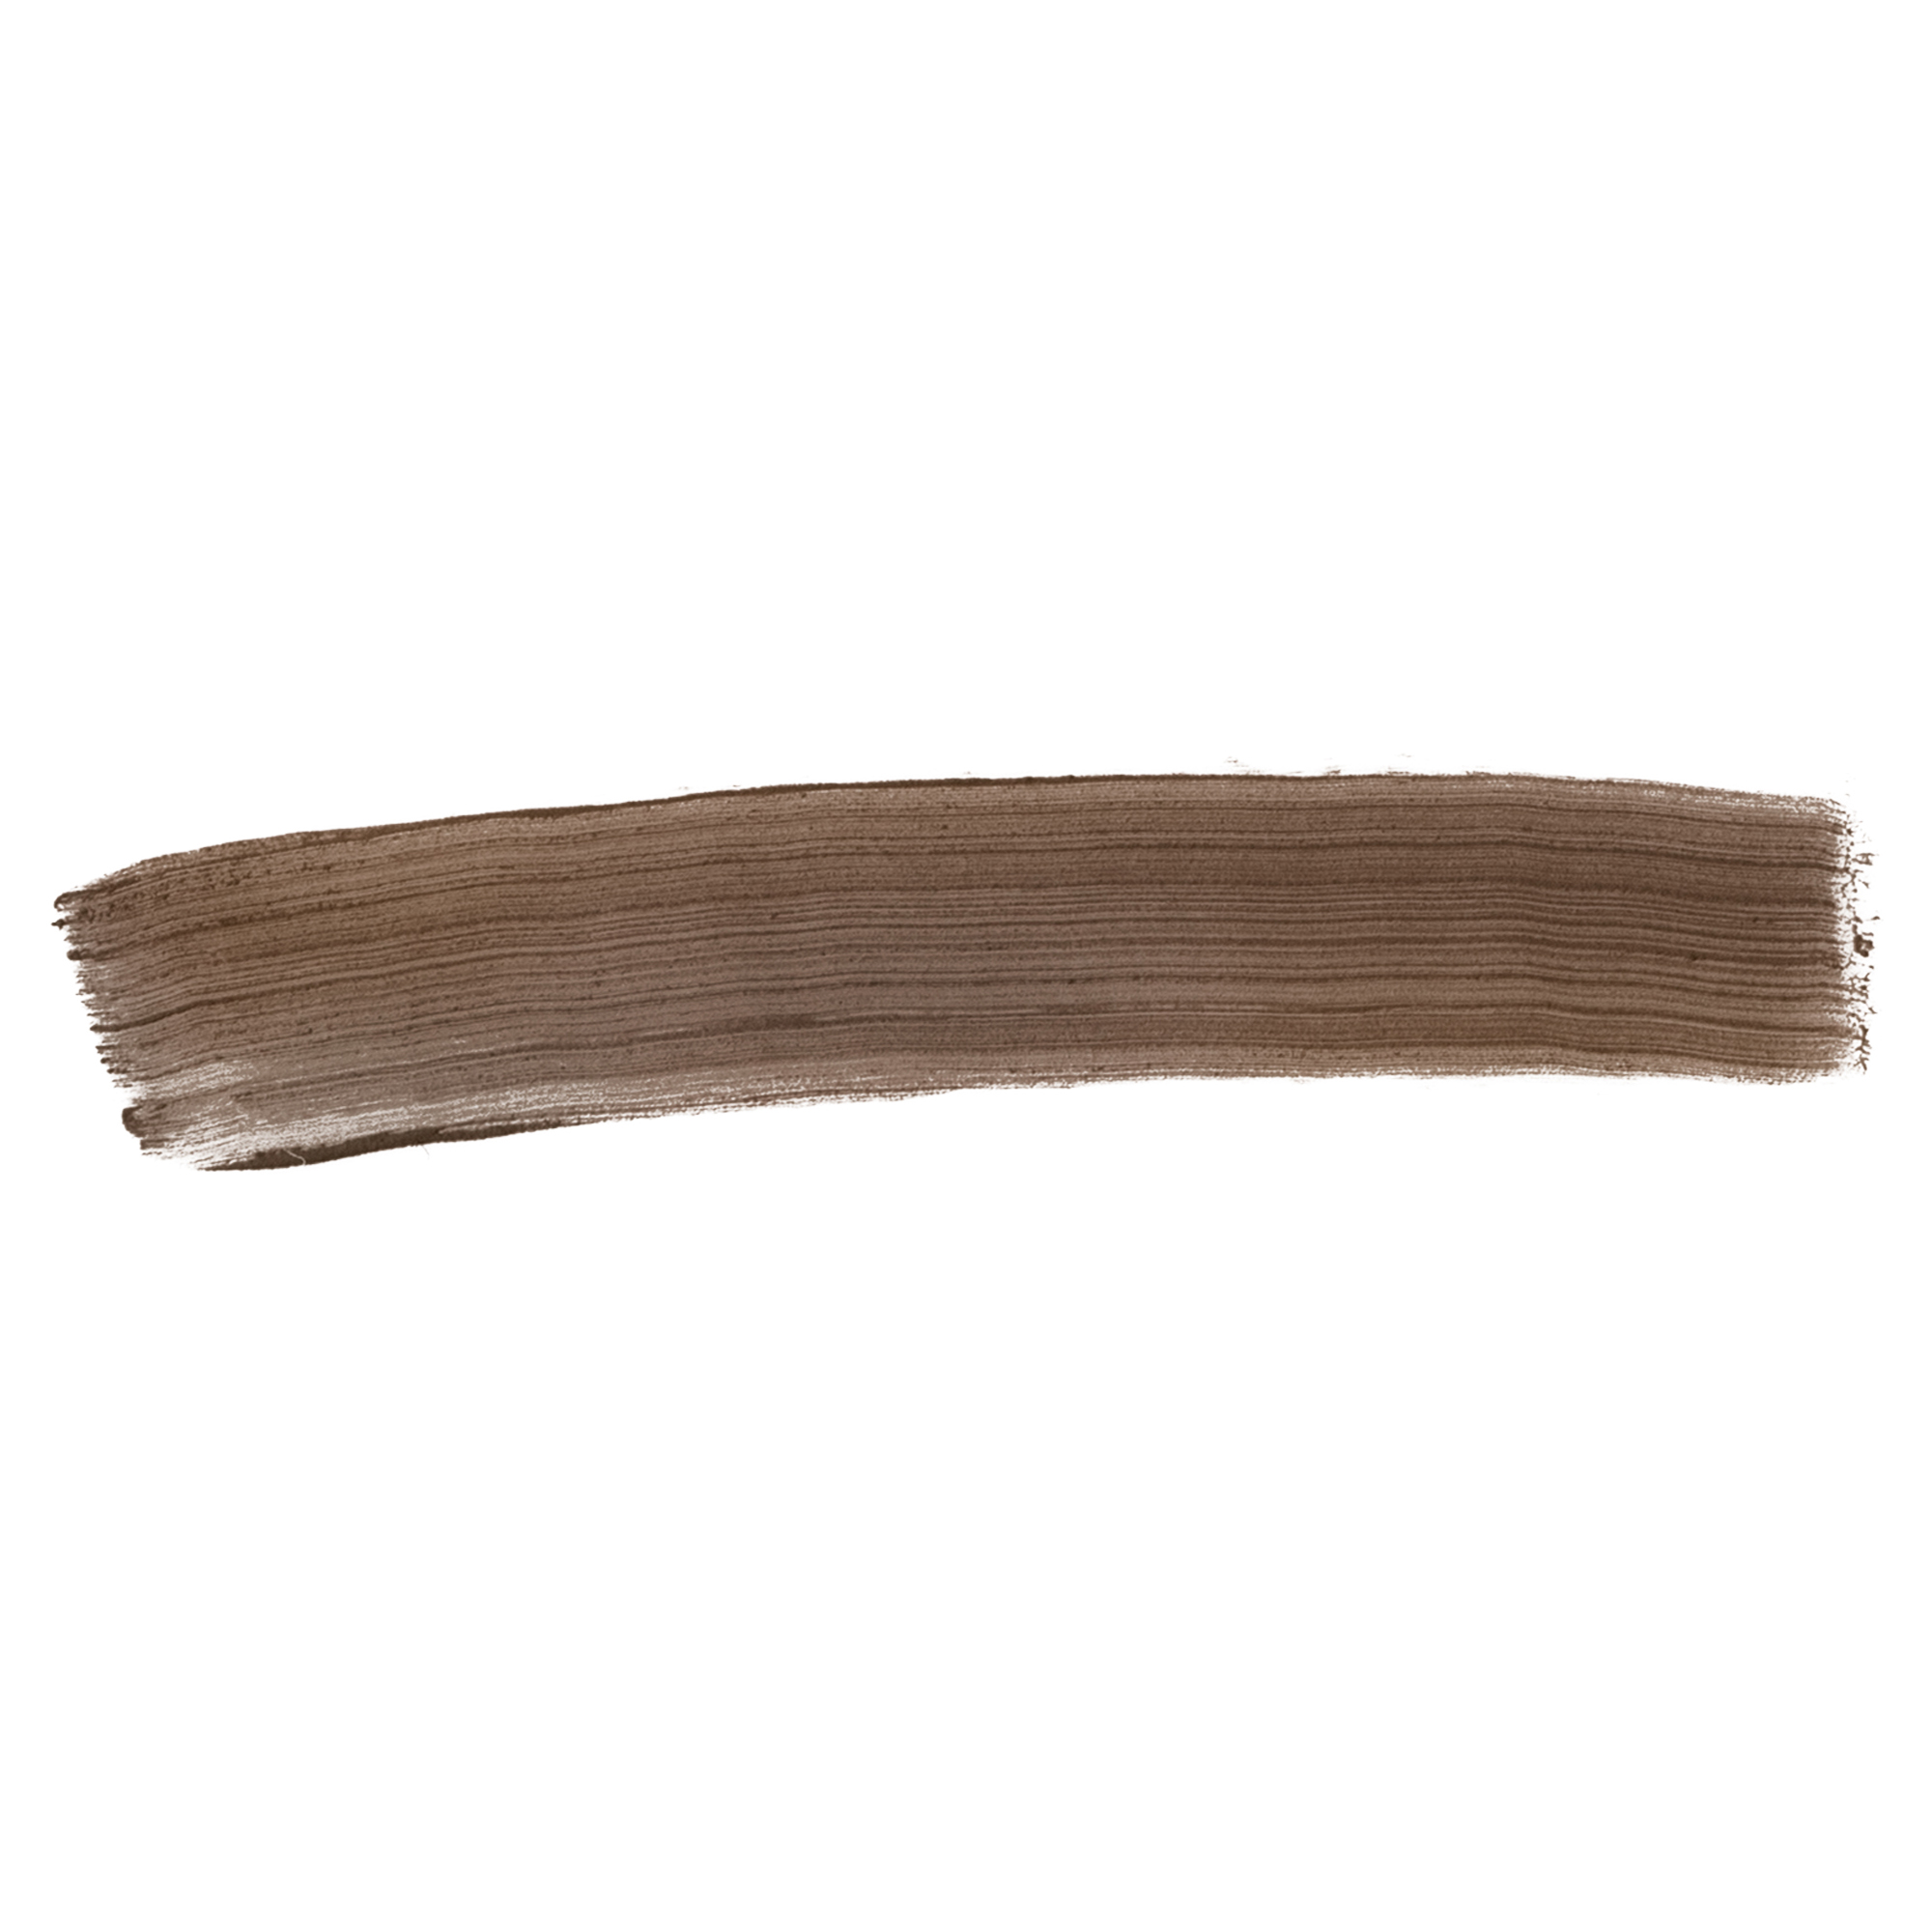 Benefit Cosmetics POWMade Brow Pomade, in Colour: 4.5 Neutral Deep Brown, Size: One Size